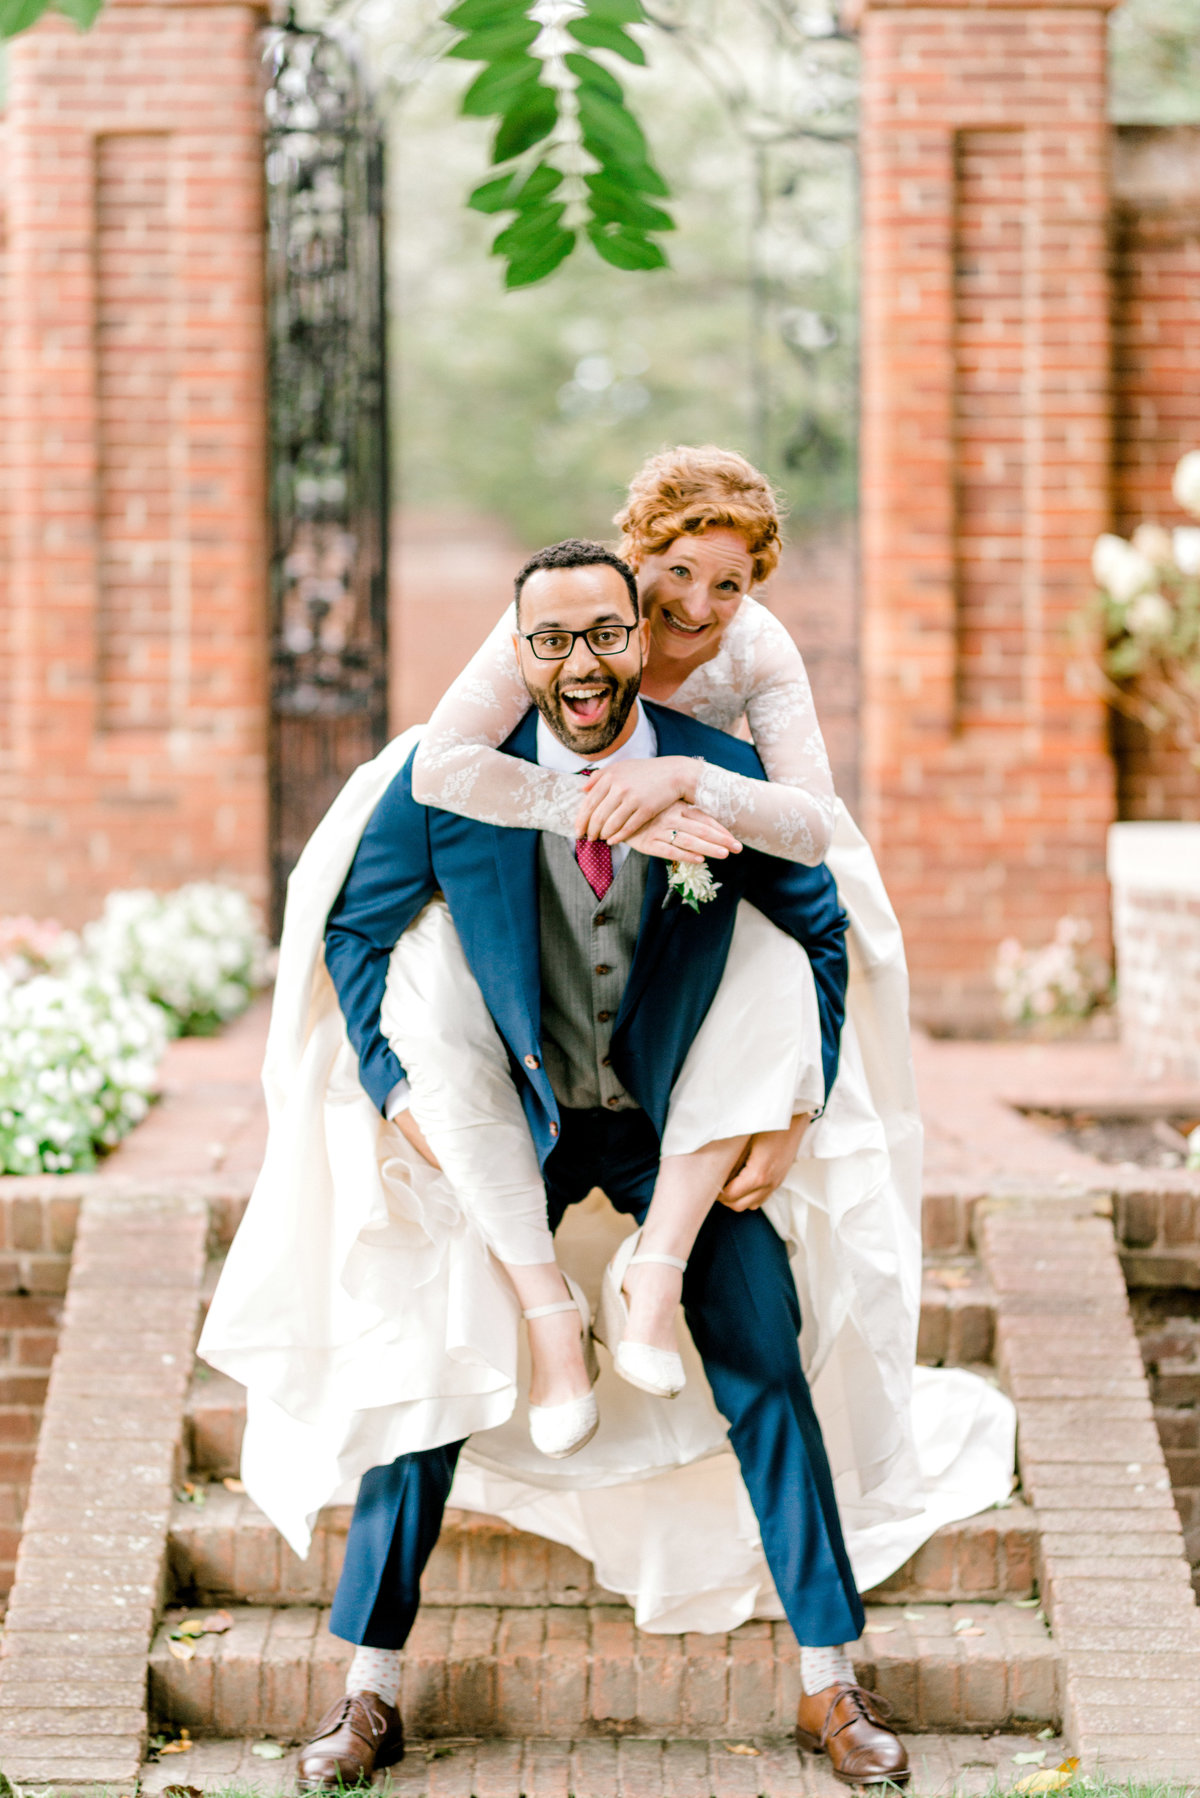 Everette&Marco_SneakPeeks_BeccaBPhotography-53